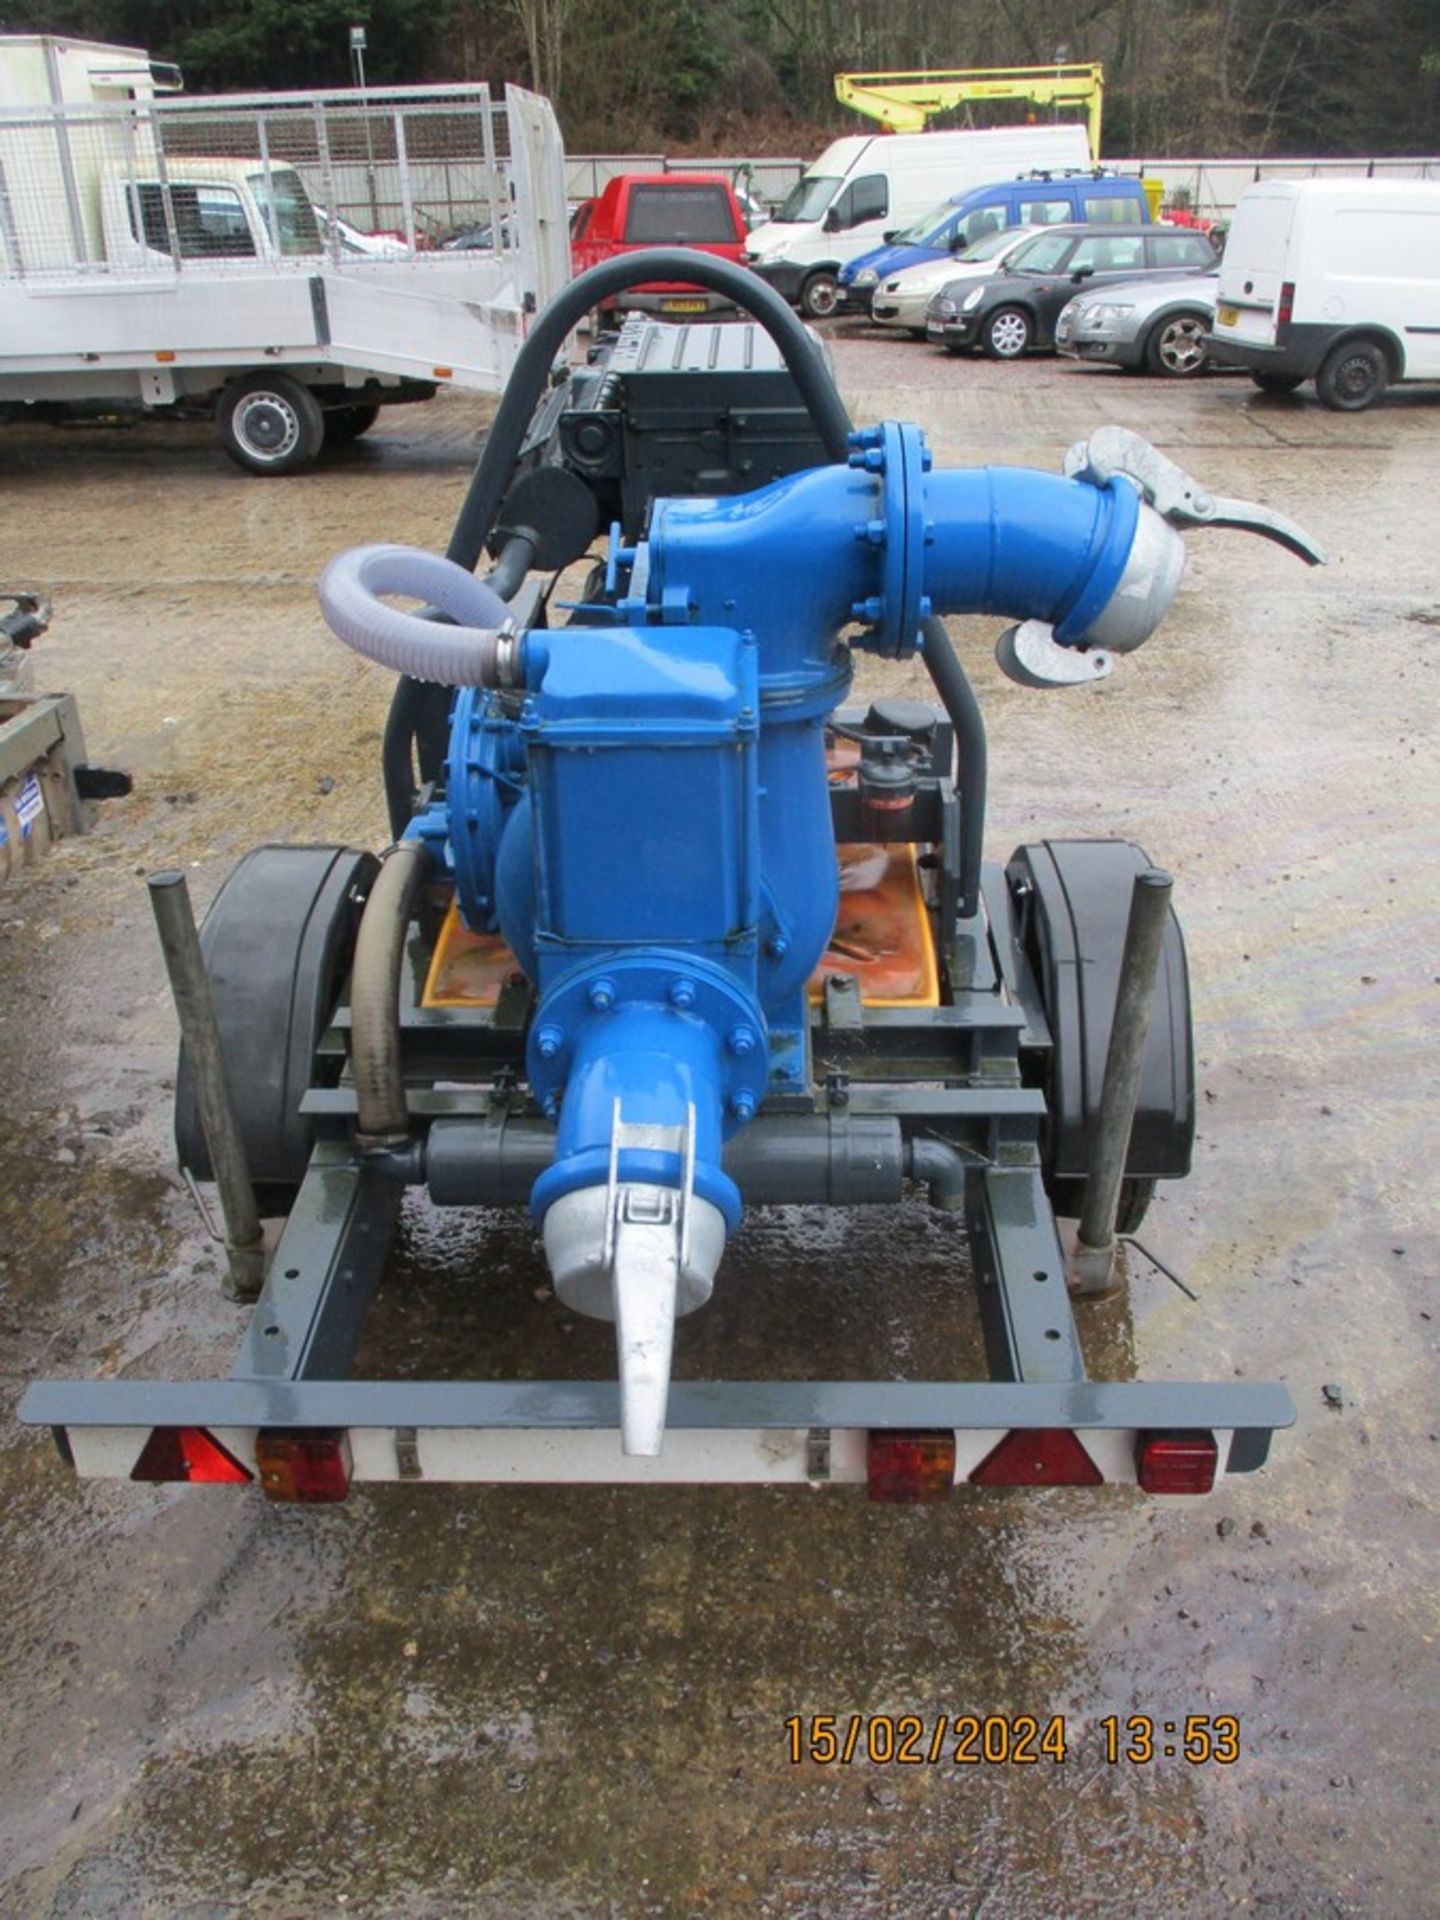 SELWOOD S150 6" SLUDGE PUMP DEUTZ ENGINE (1 COMPANY OWNER FROM NEW) - Image 2 of 4